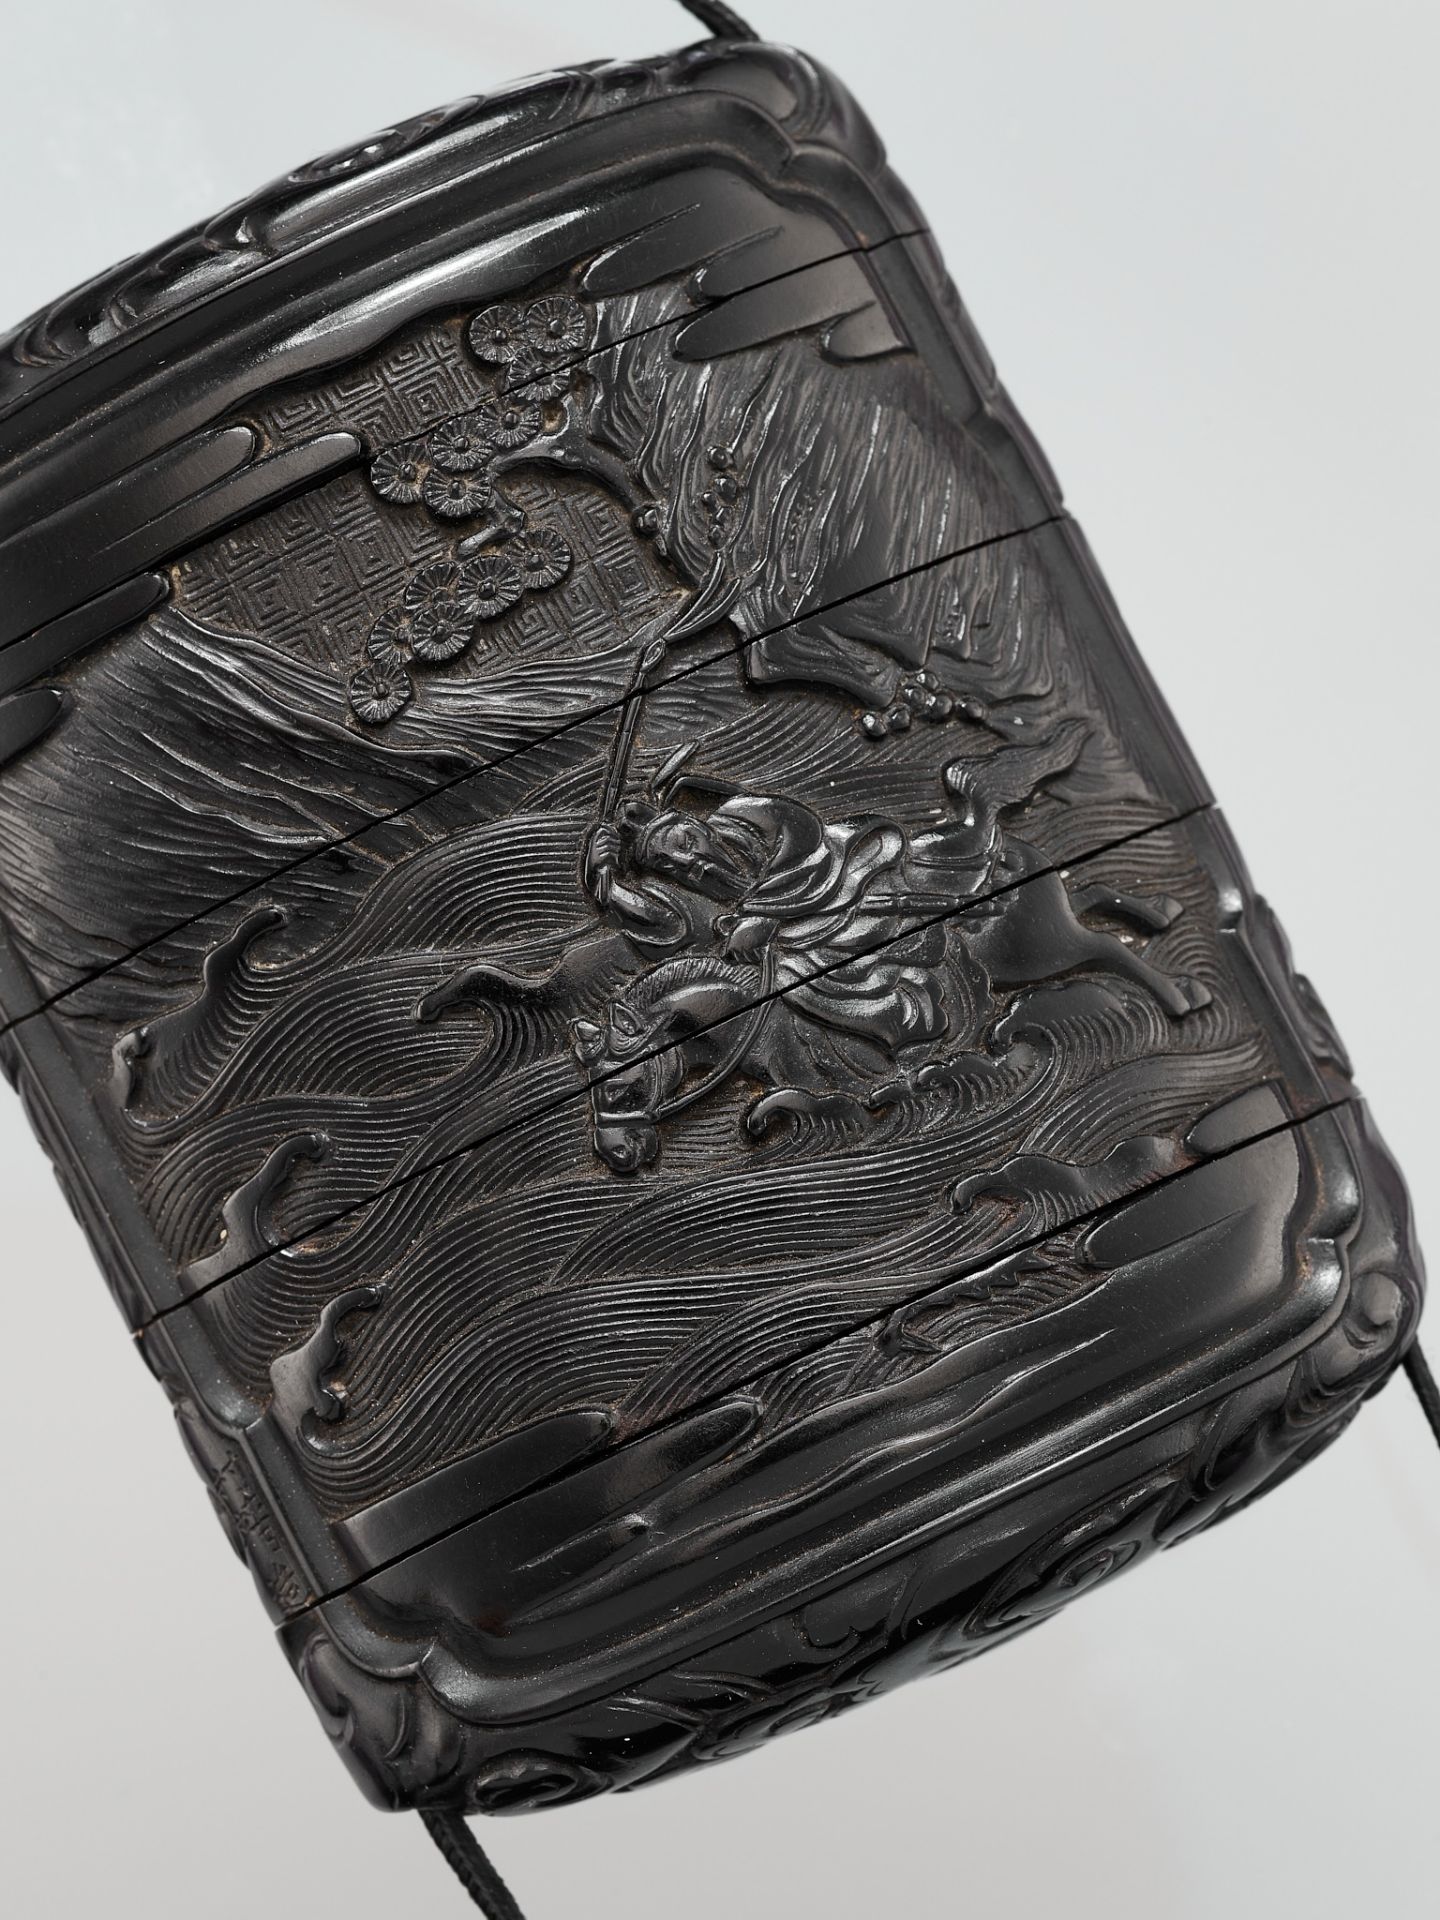 ZONSEI: A FINE TSUIKOKU (CARVED BLACK LACQUER) FOUR-CASE INRO DEPICTING CHORYO AND KOSEKIKO - Image 2 of 7